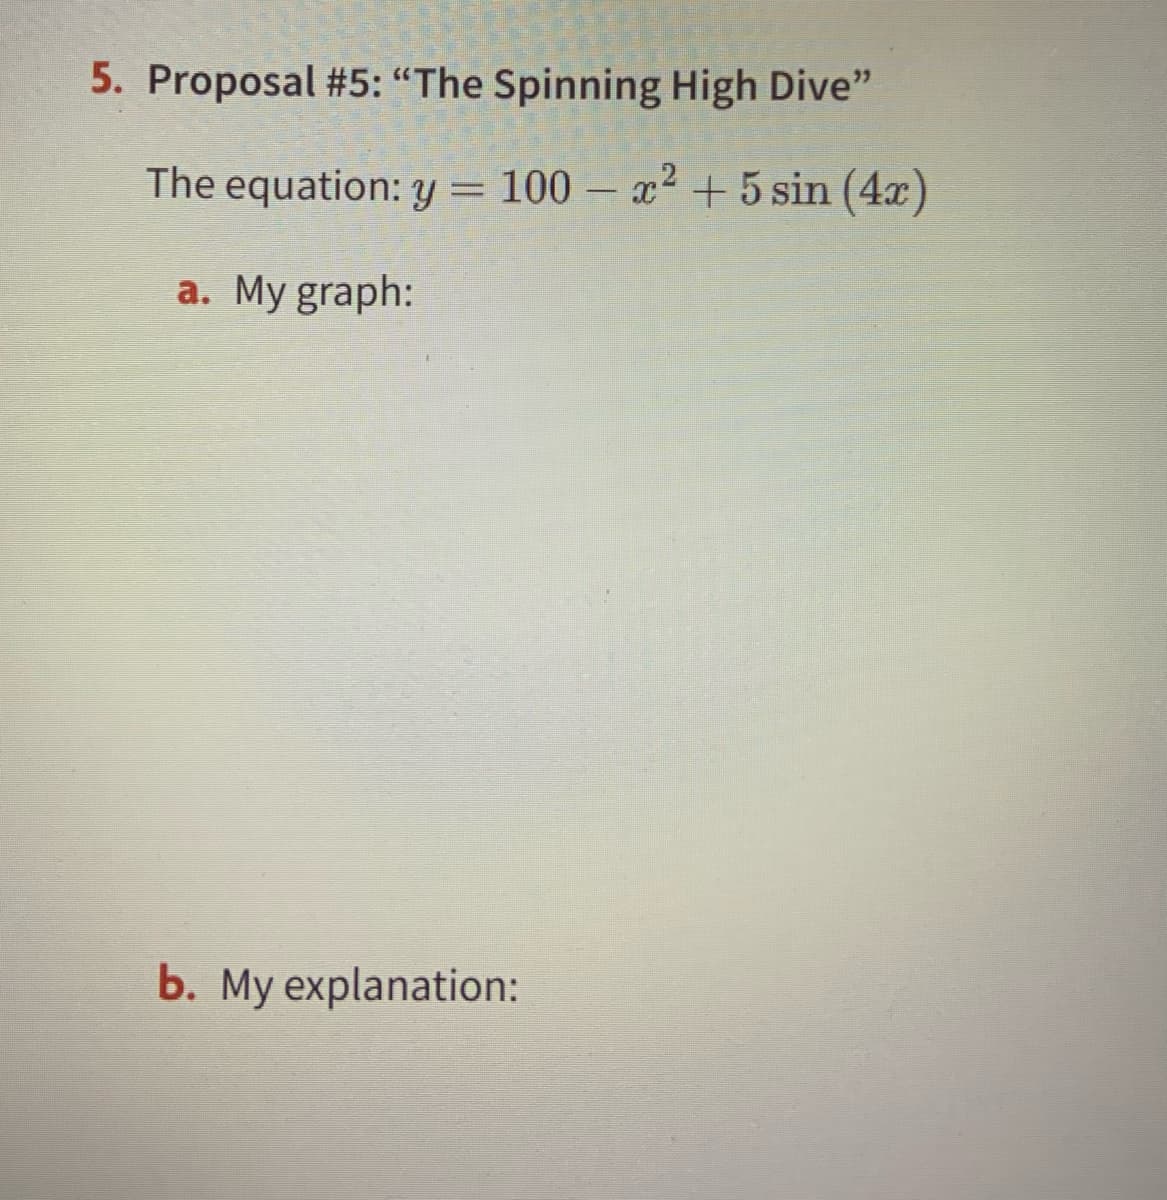 5. Proposal #5: "The Spinning High Dive"
The equation: y = 100 – x² + 5 sin (4x)
a. My graph:
b. My explanation:
